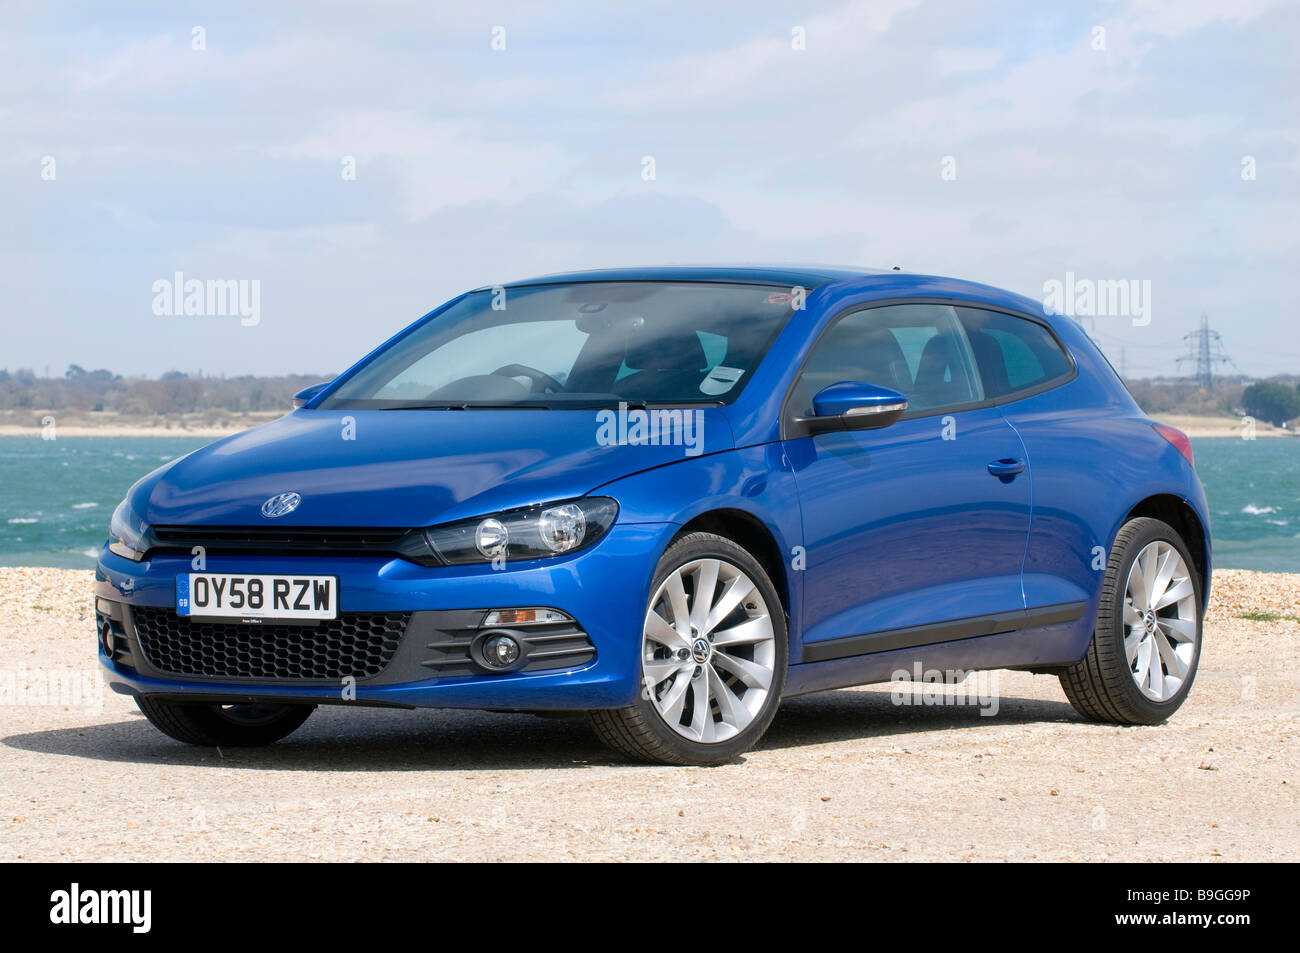 Page 2 - Scirocco High Resolution Stock Photography and Images - Alamy